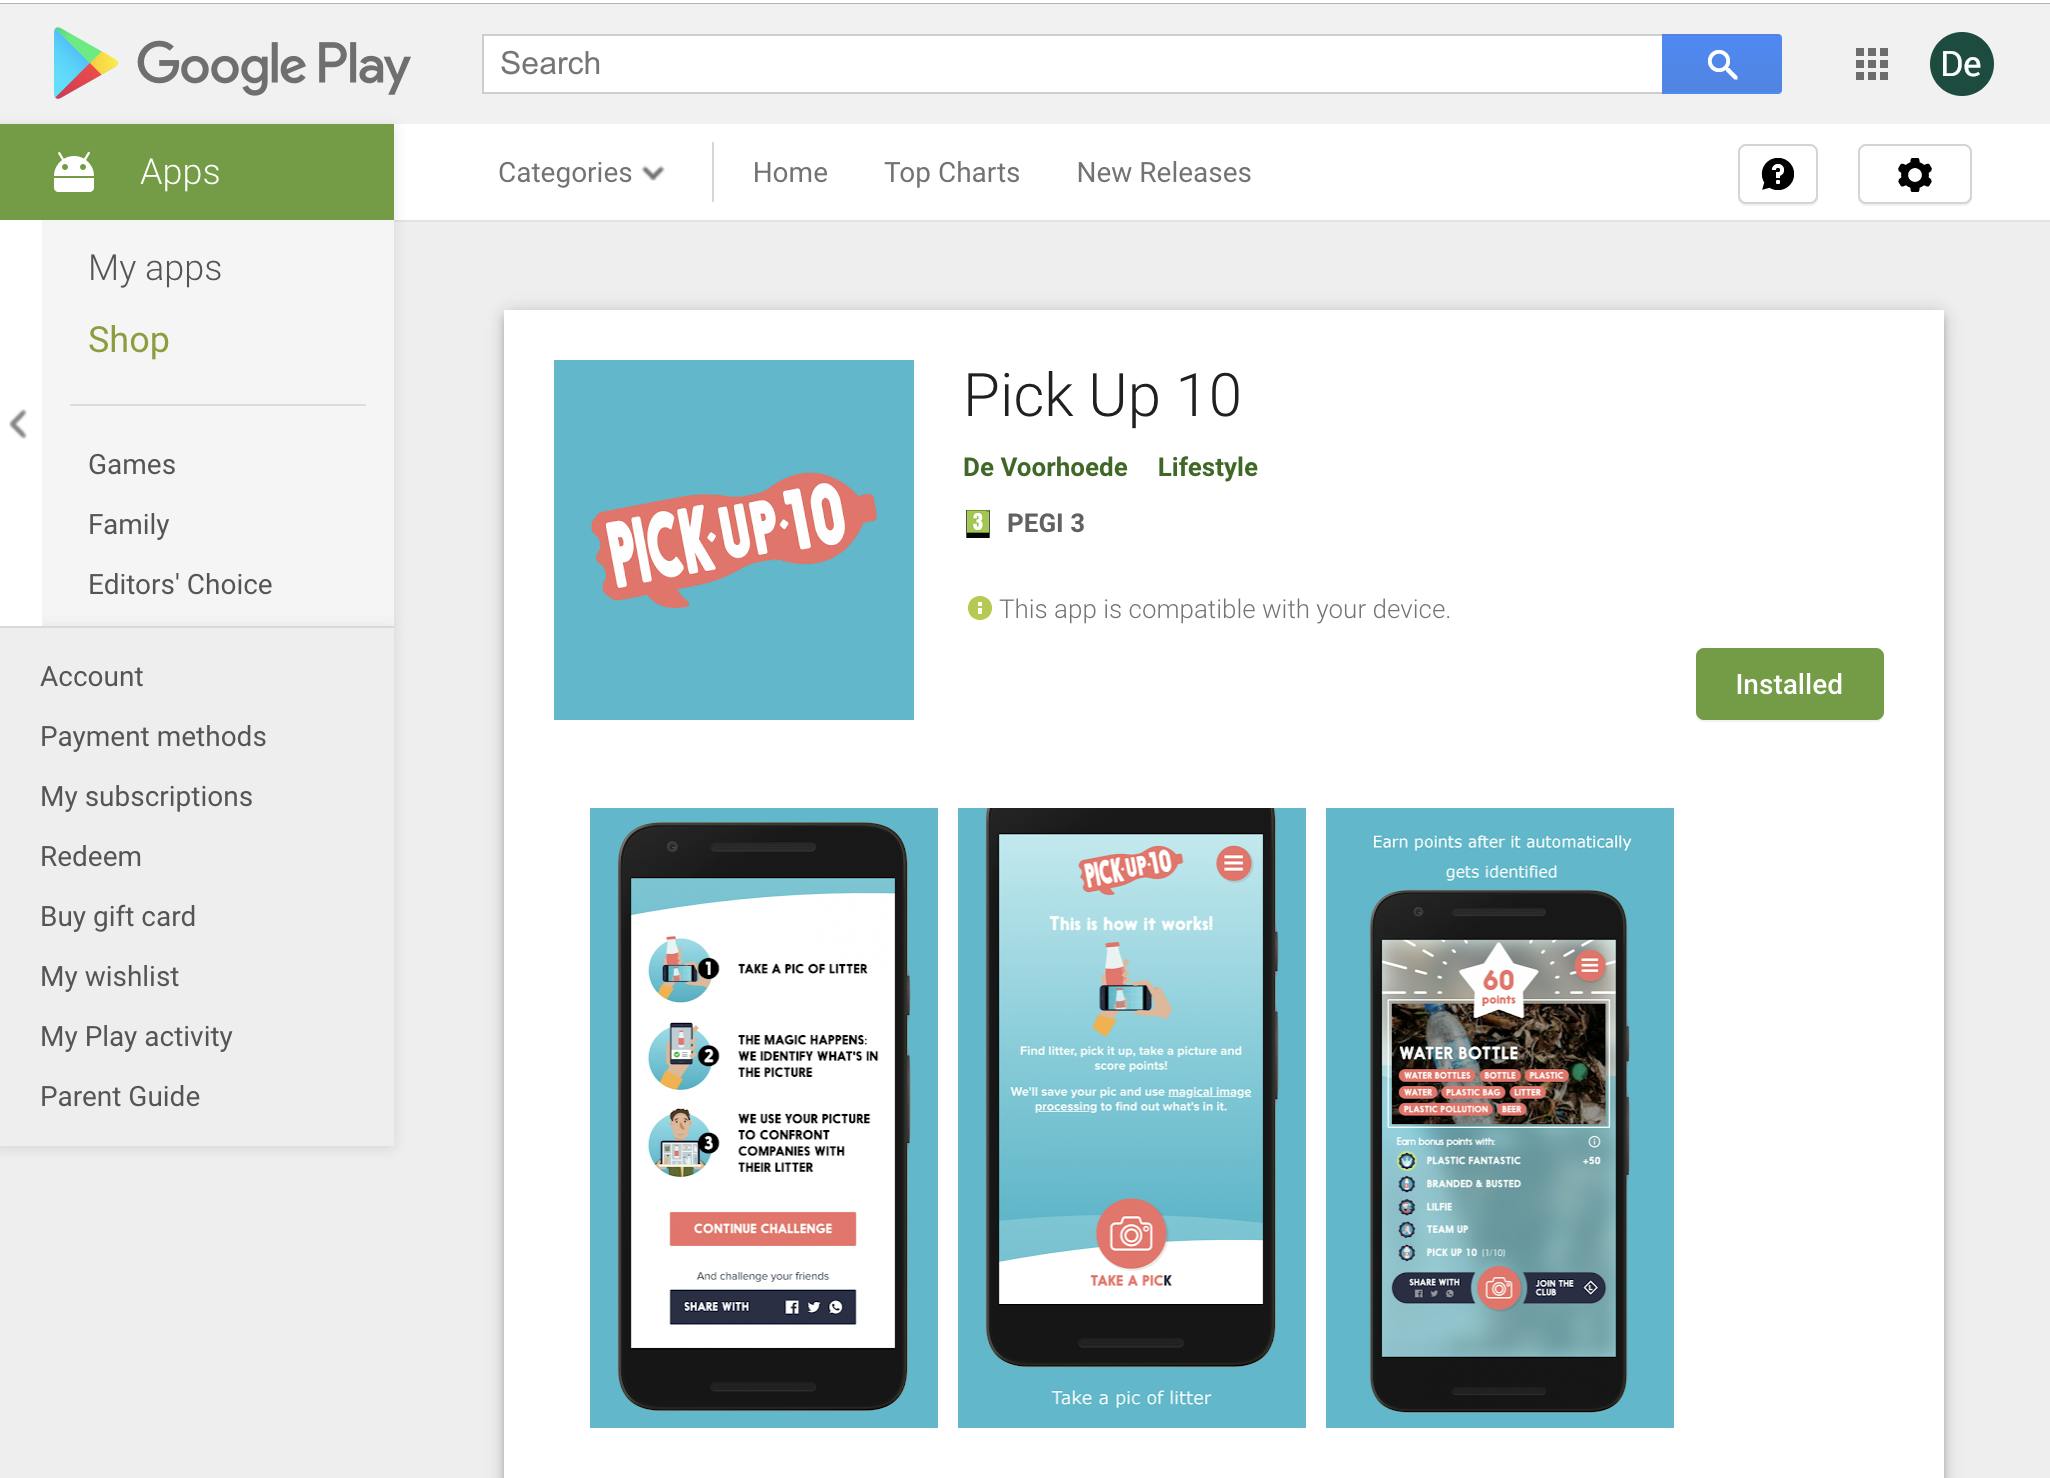 Our Pick Up 10 PWA in the Play Store